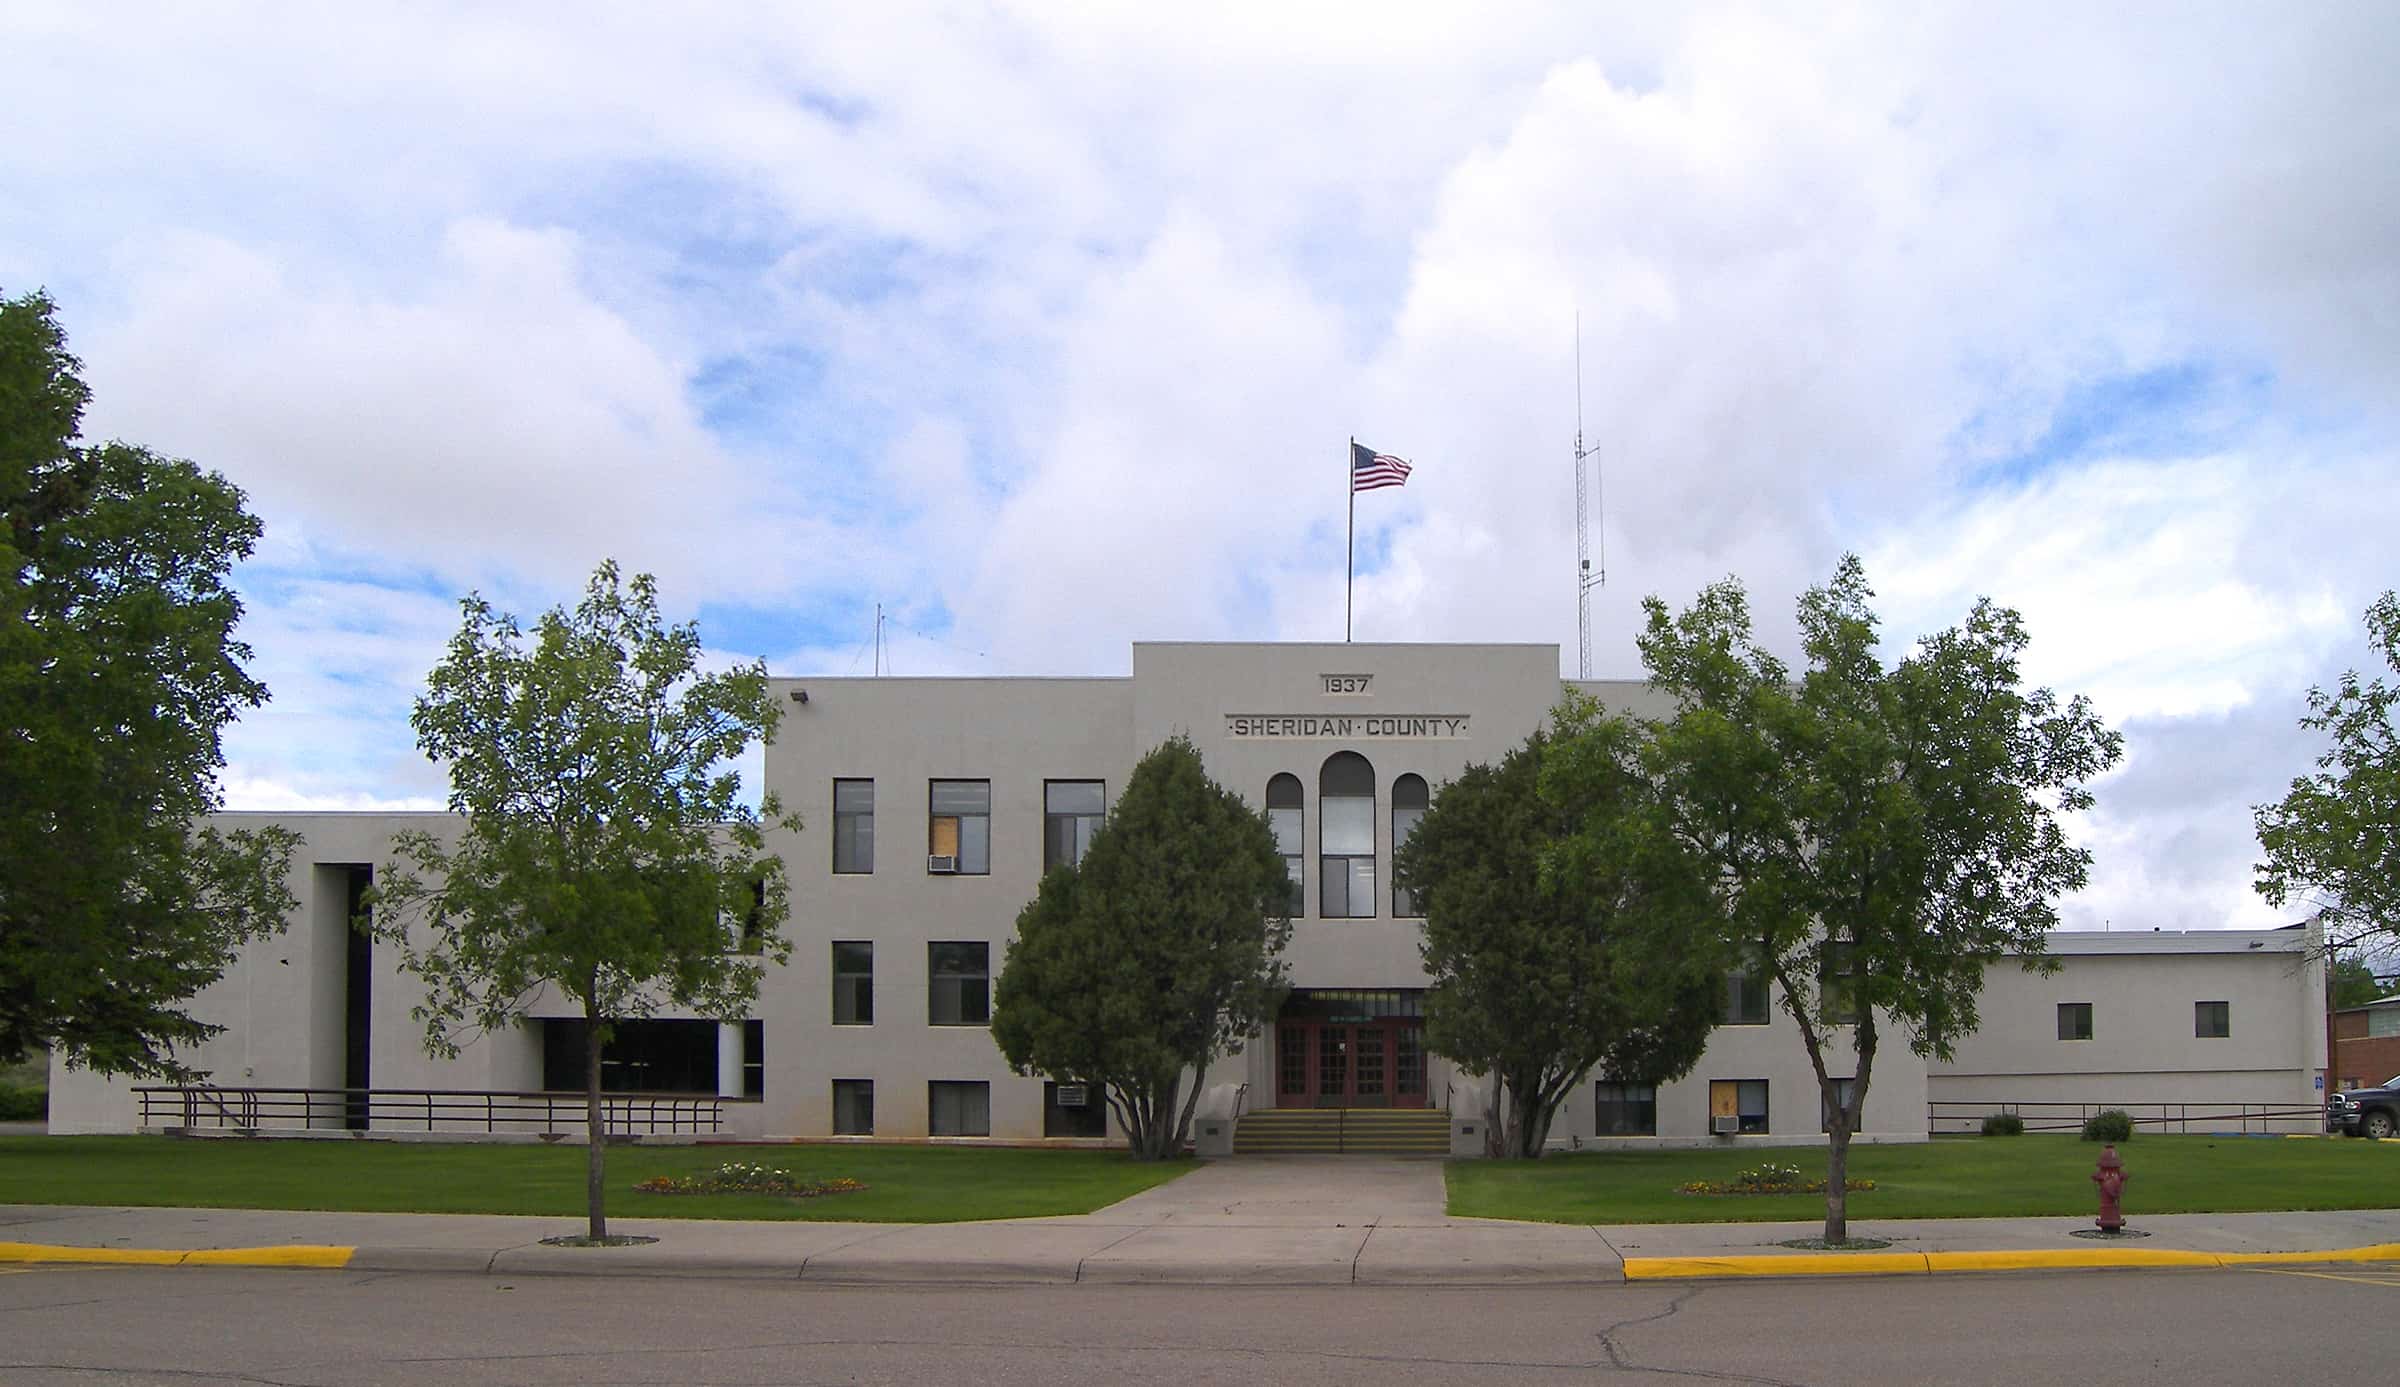 Sheridan county courthouse by Larry D. Moore